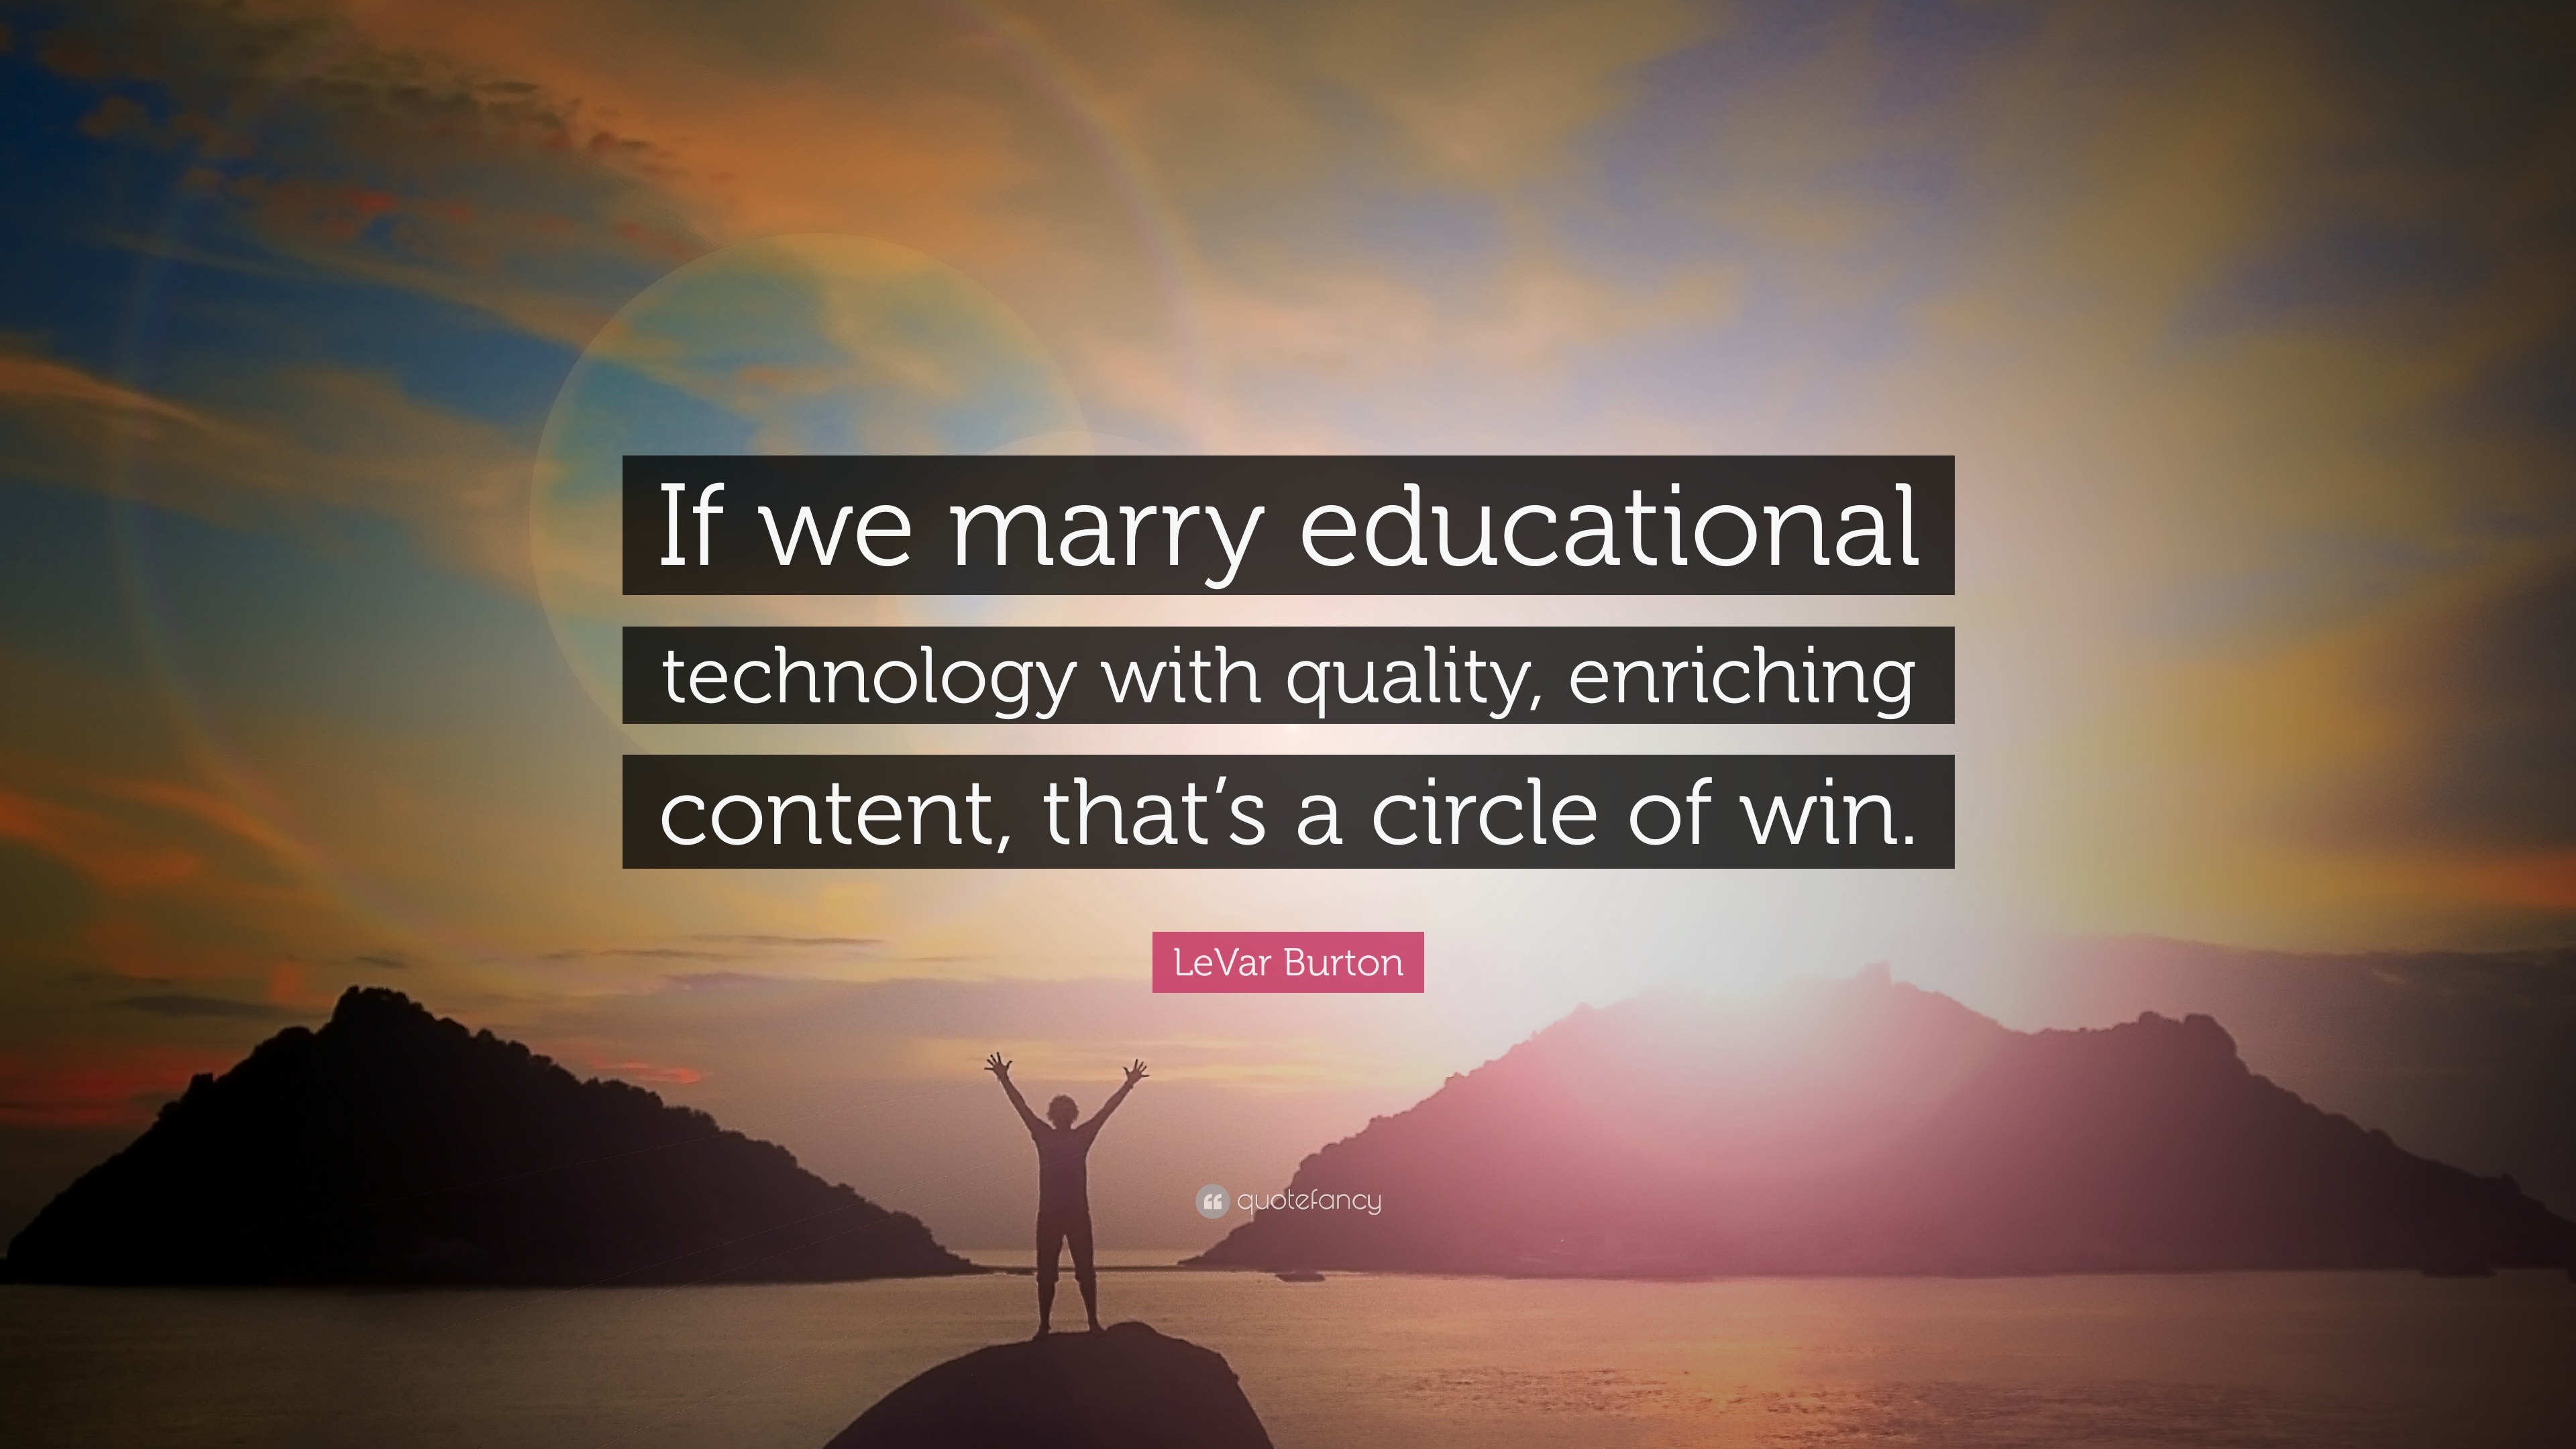 educational technology in education quotes